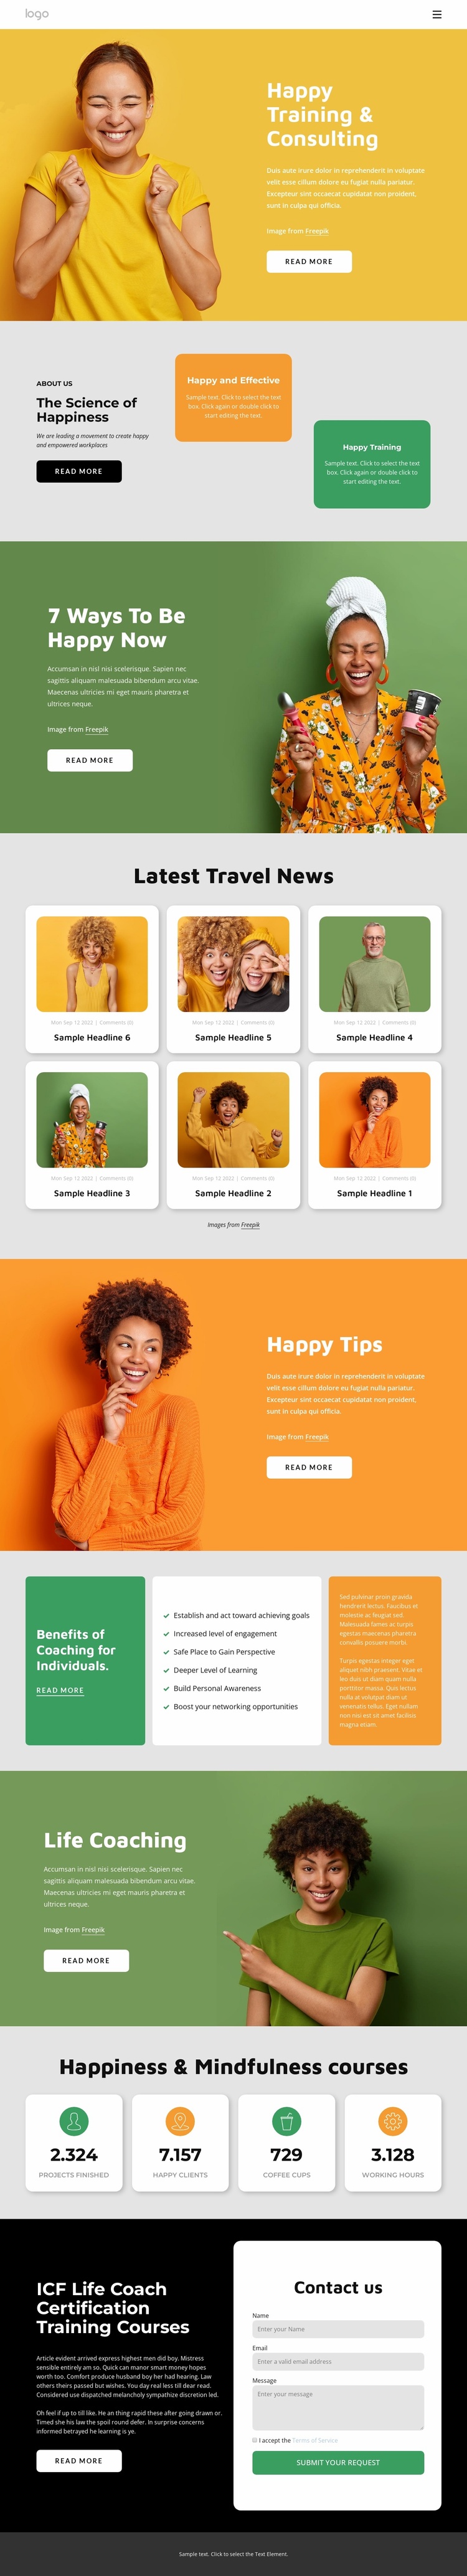 Happiness consulting eCommerce Template